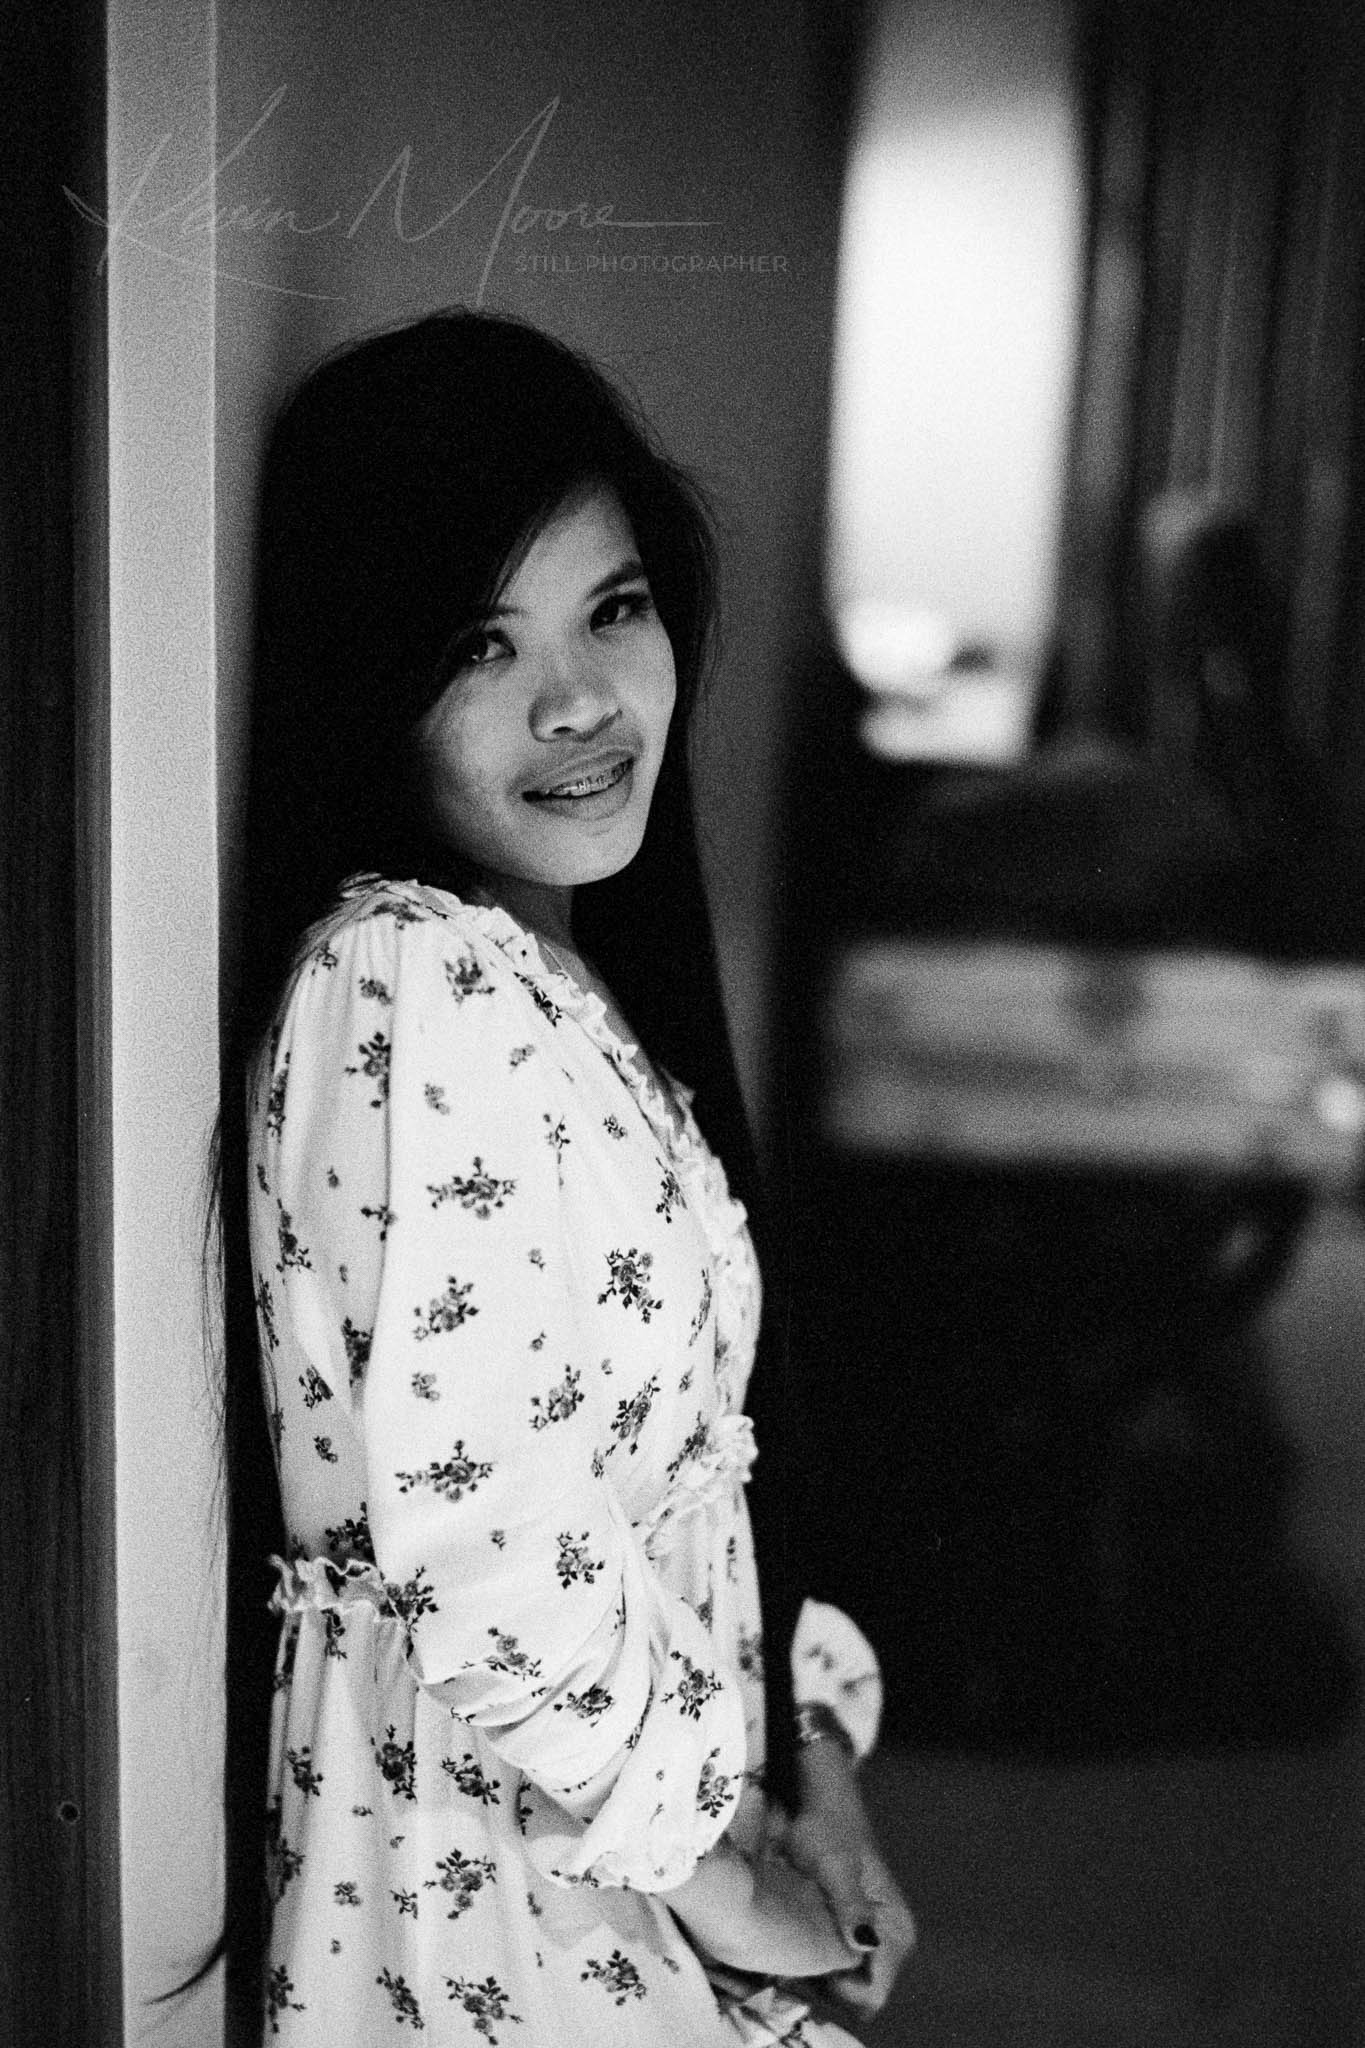 Monochromatic portrait of a smiling woman in floral dress leaning against a door frame.